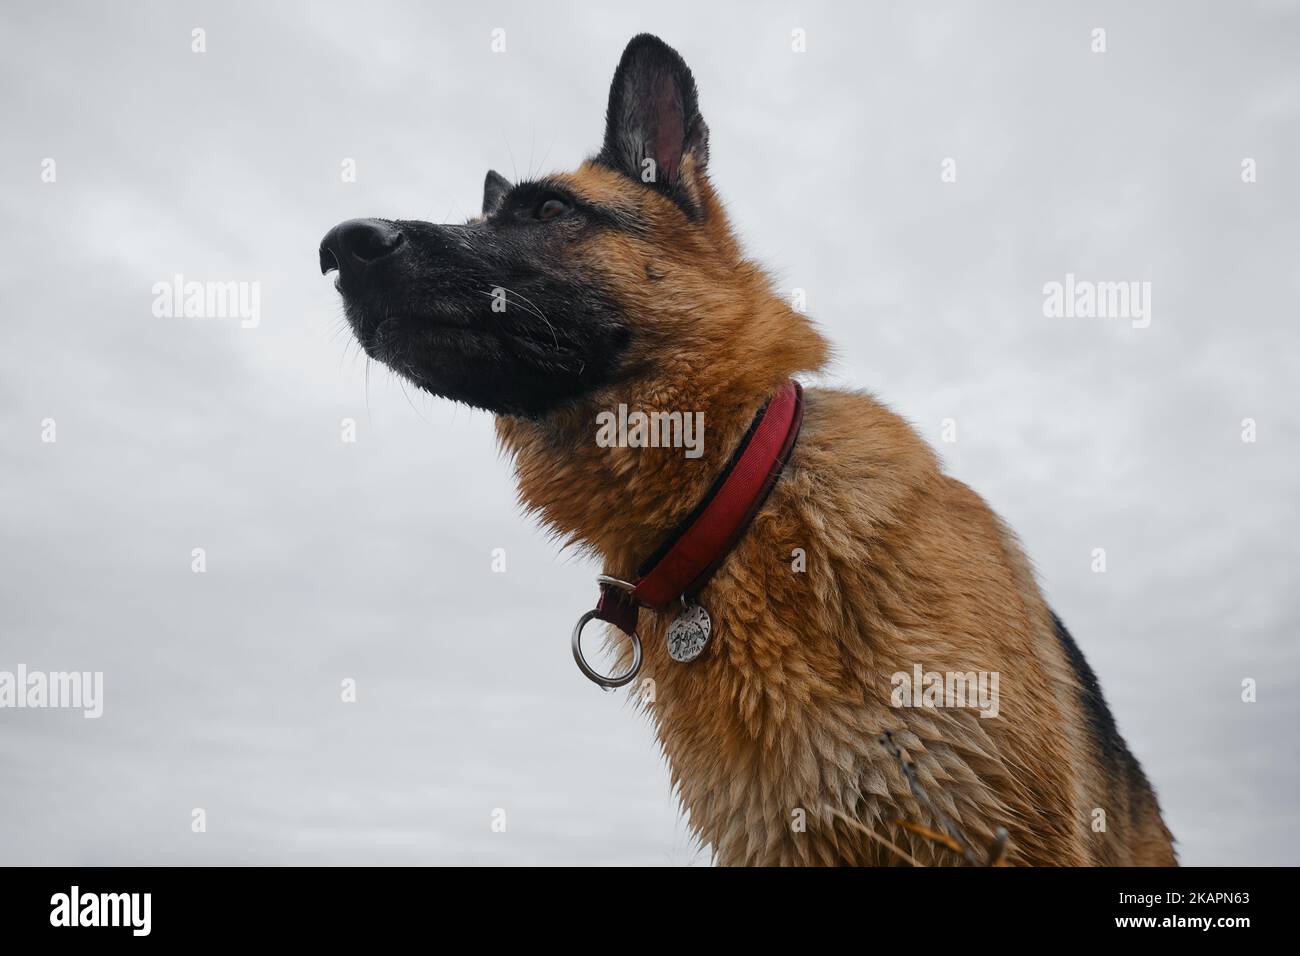 Portrait ofGerman Shepherd on wide angle, bottom view against gray cloudy sky. Dog standing outside and looking into distance. Serious focused attenti Stock Photo